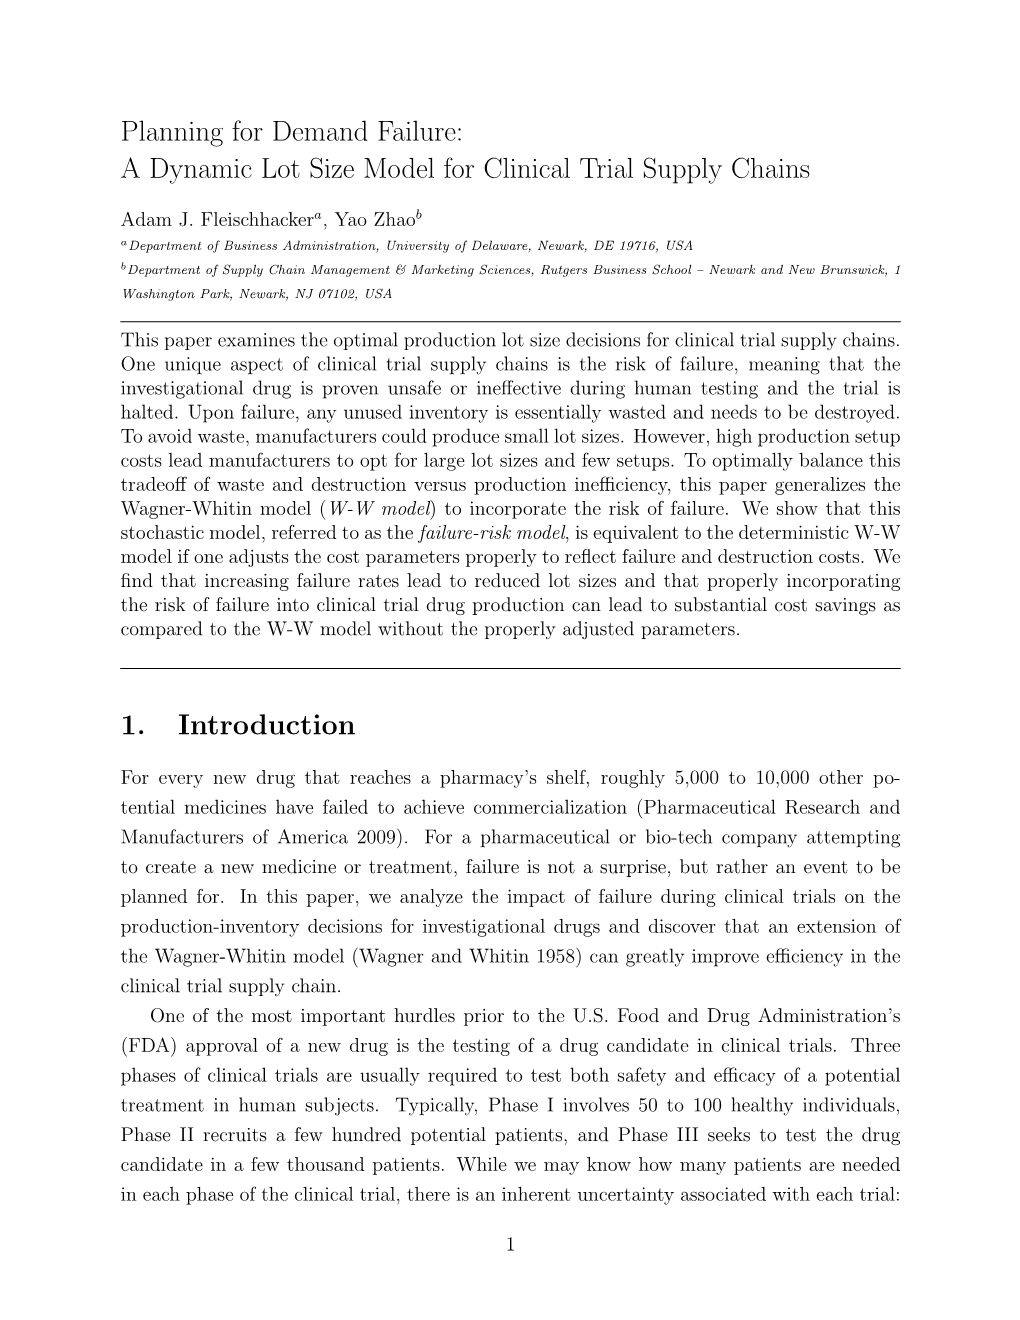 A Dynamic Lot Size Model for Clinical Trial Supply Chains